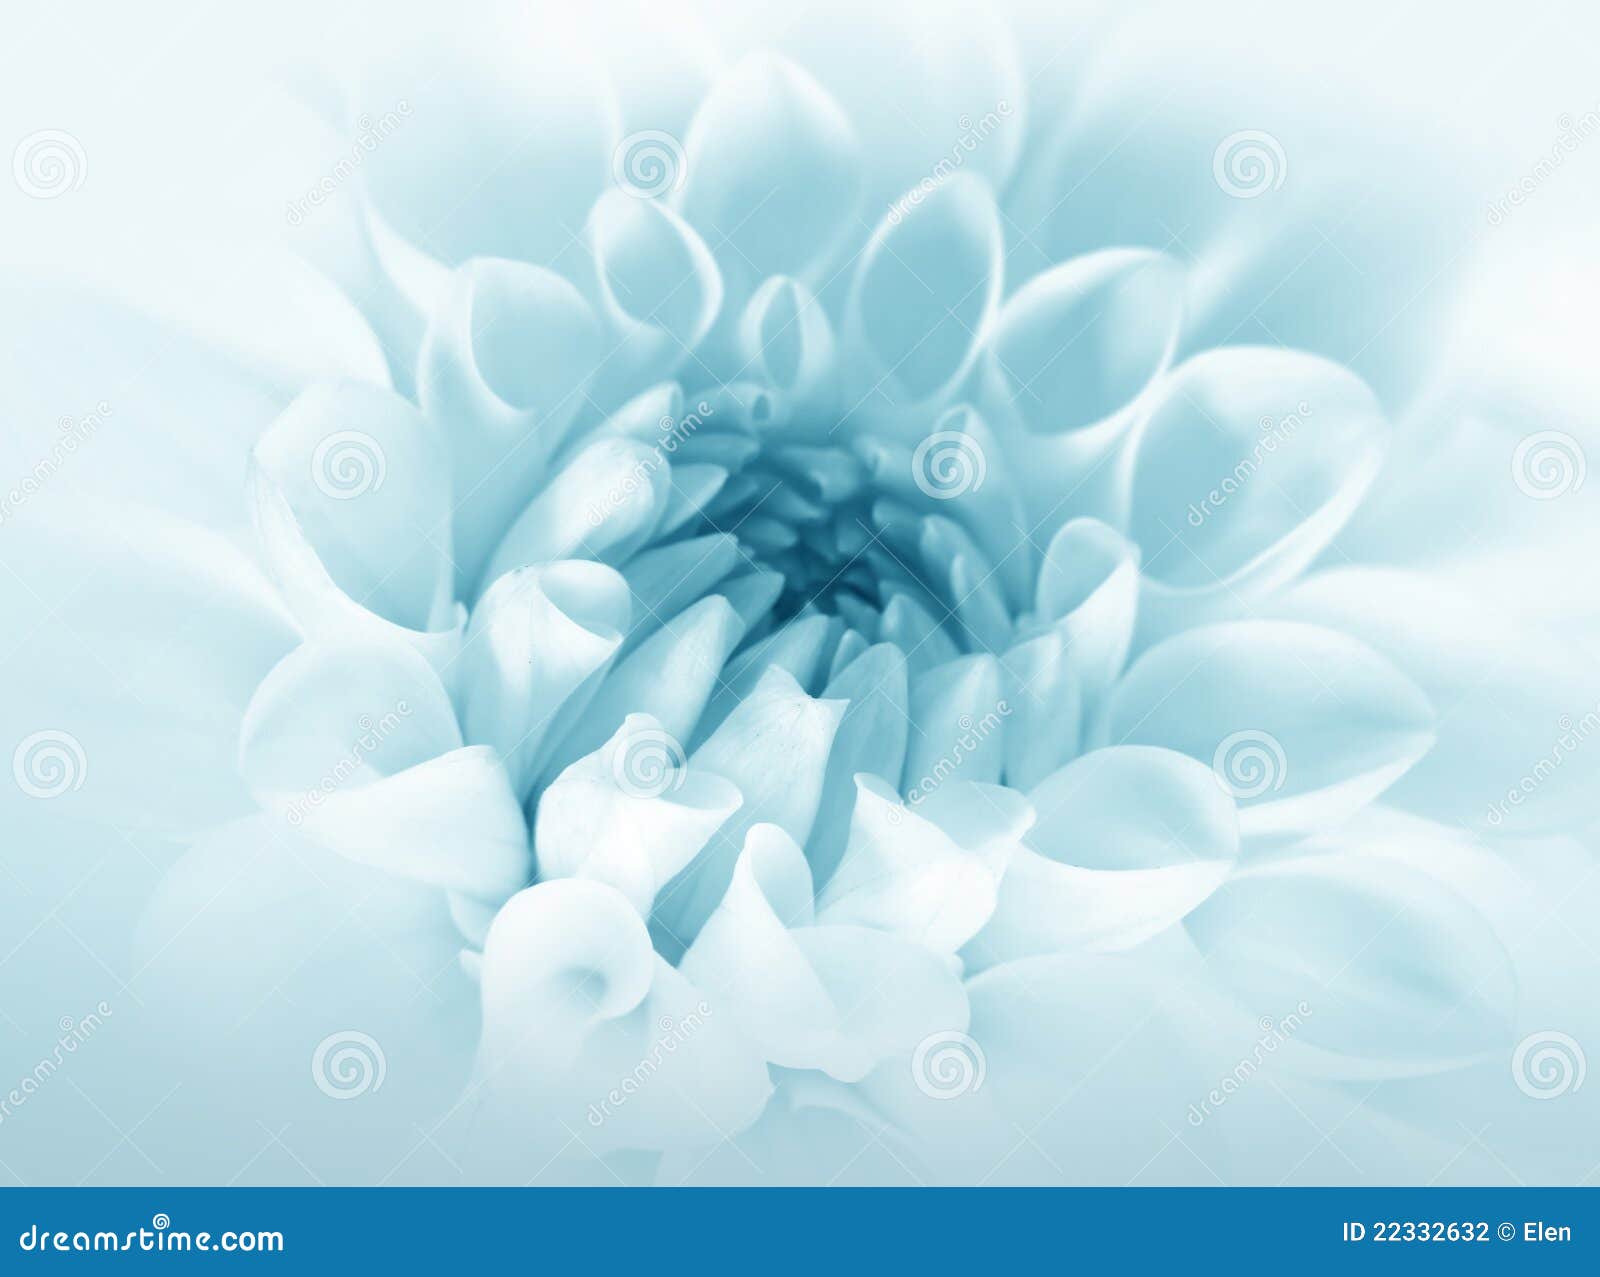 420+ Blue Flower HD Wallpapers and Backgrounds